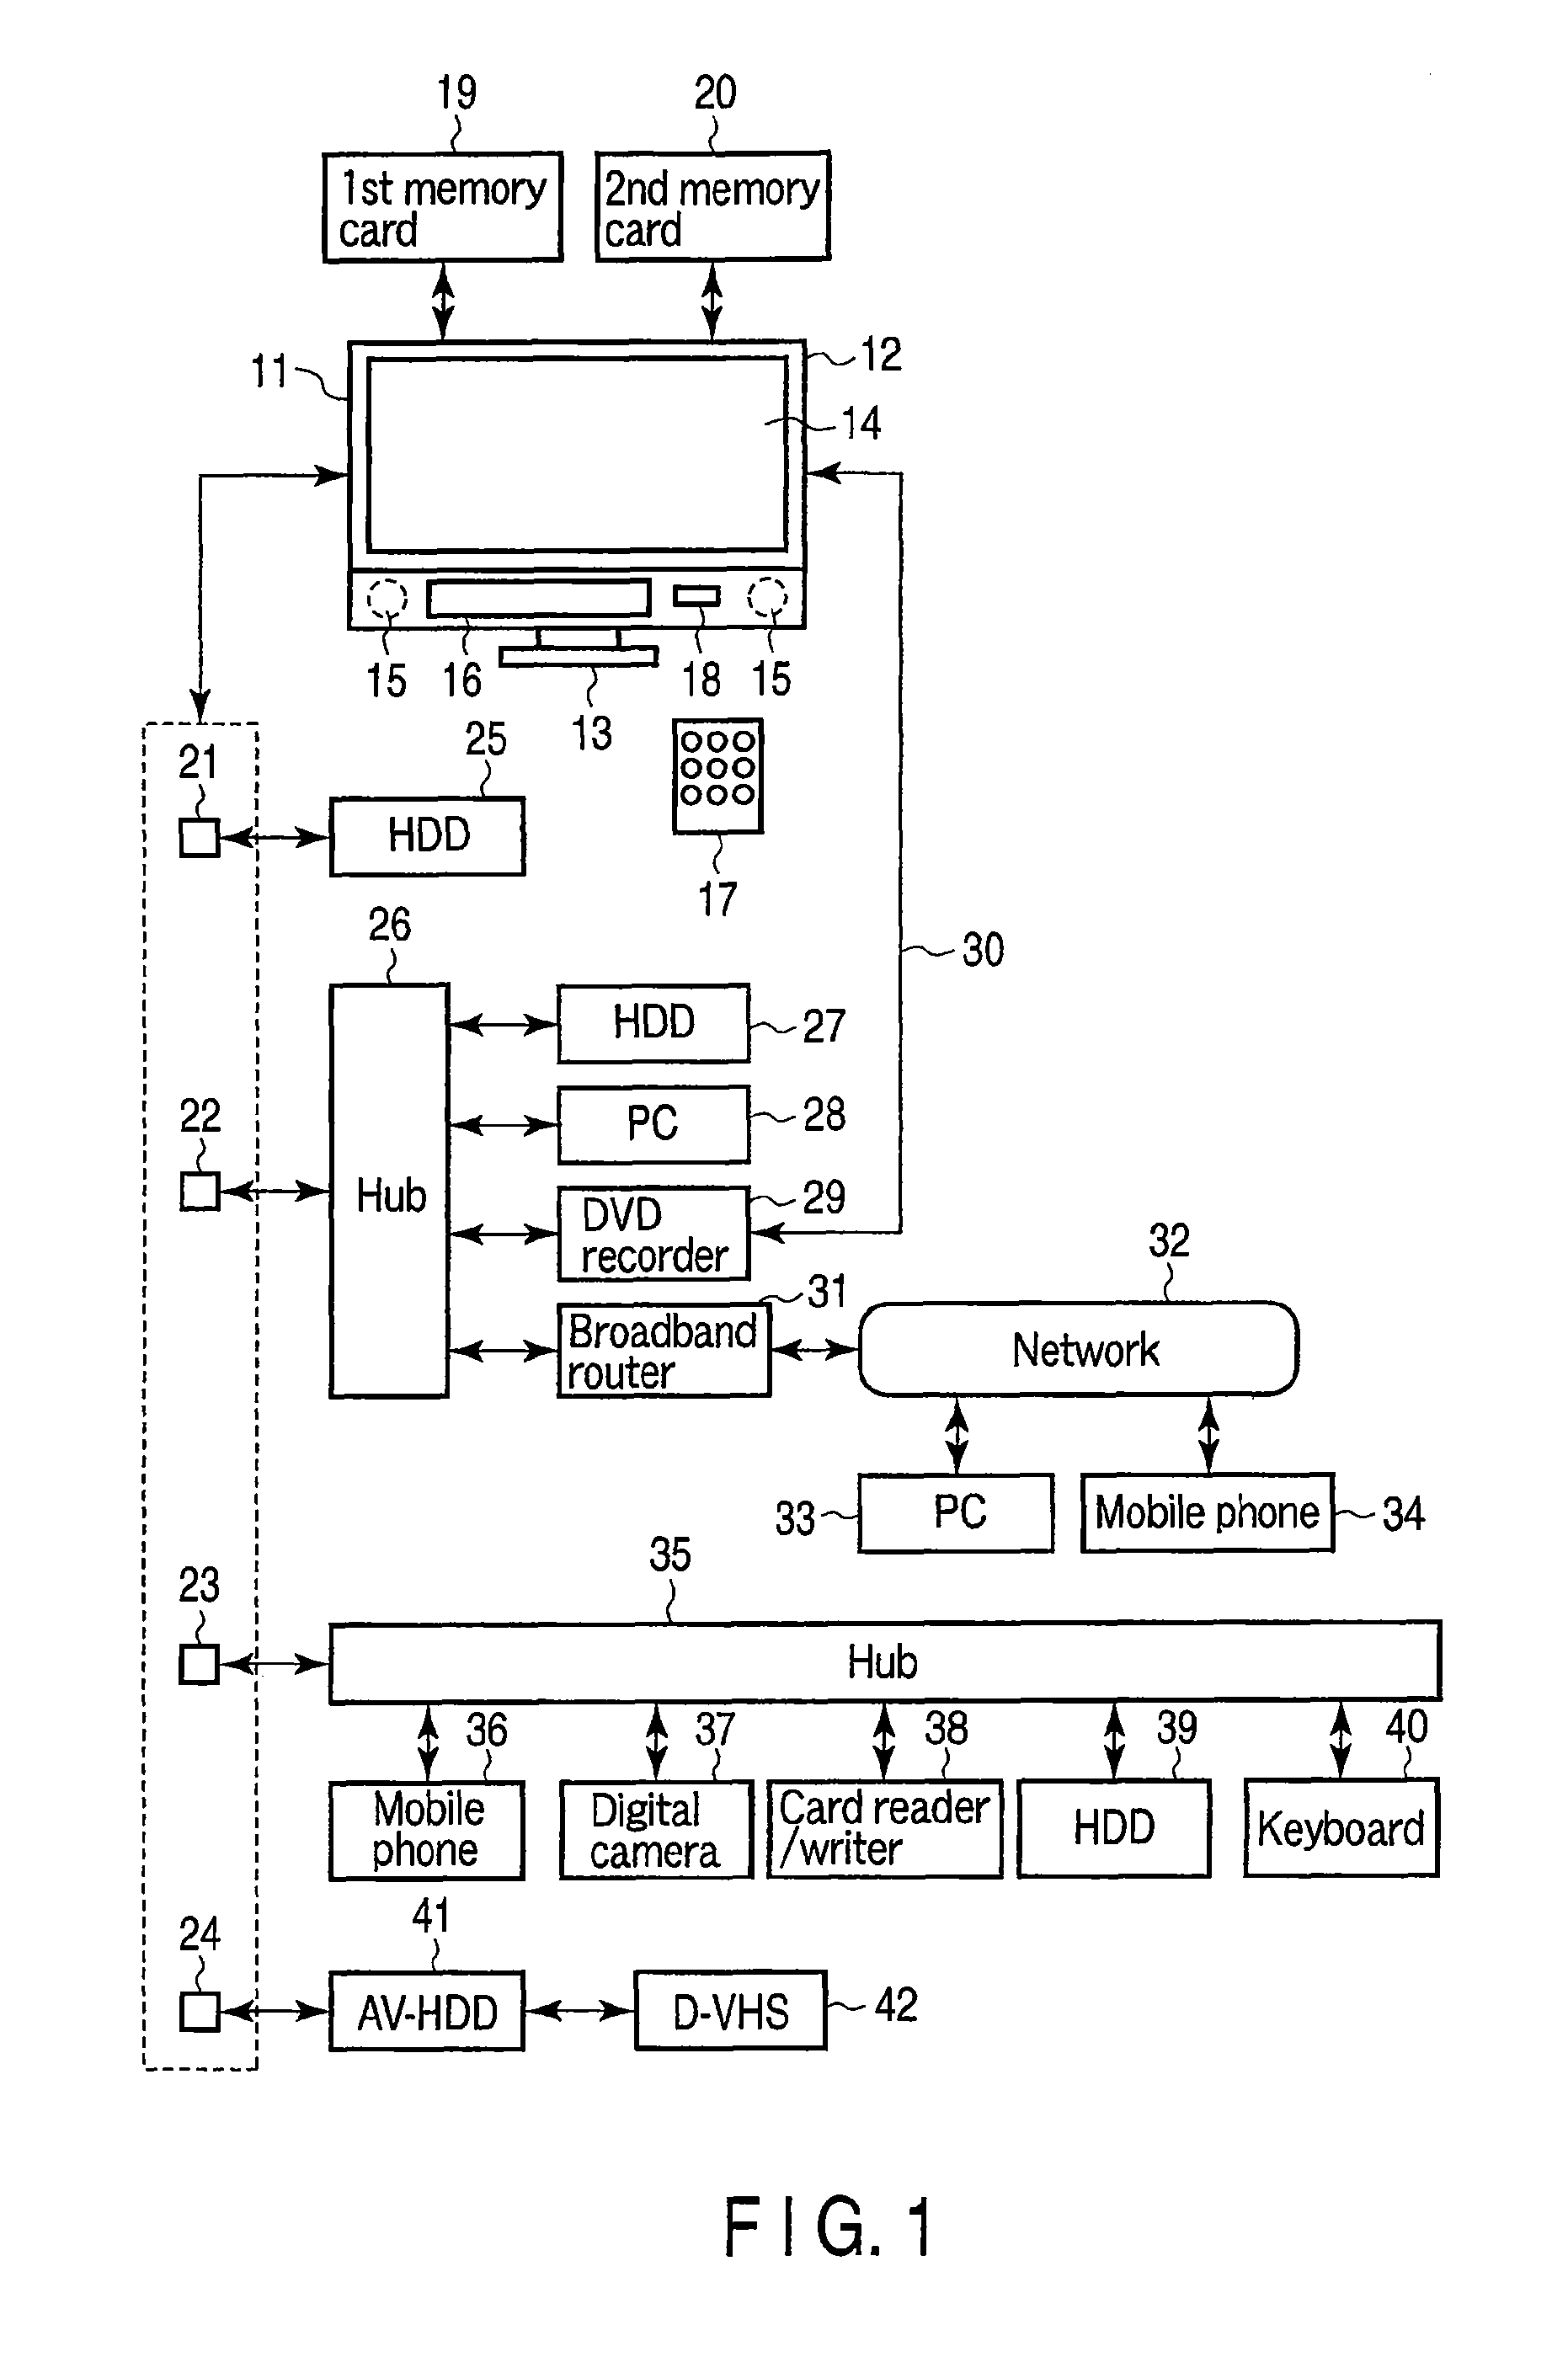 Apparatus, method, and program for sound quality correction based on identification of a speech signal and a music signal from an input audio signal